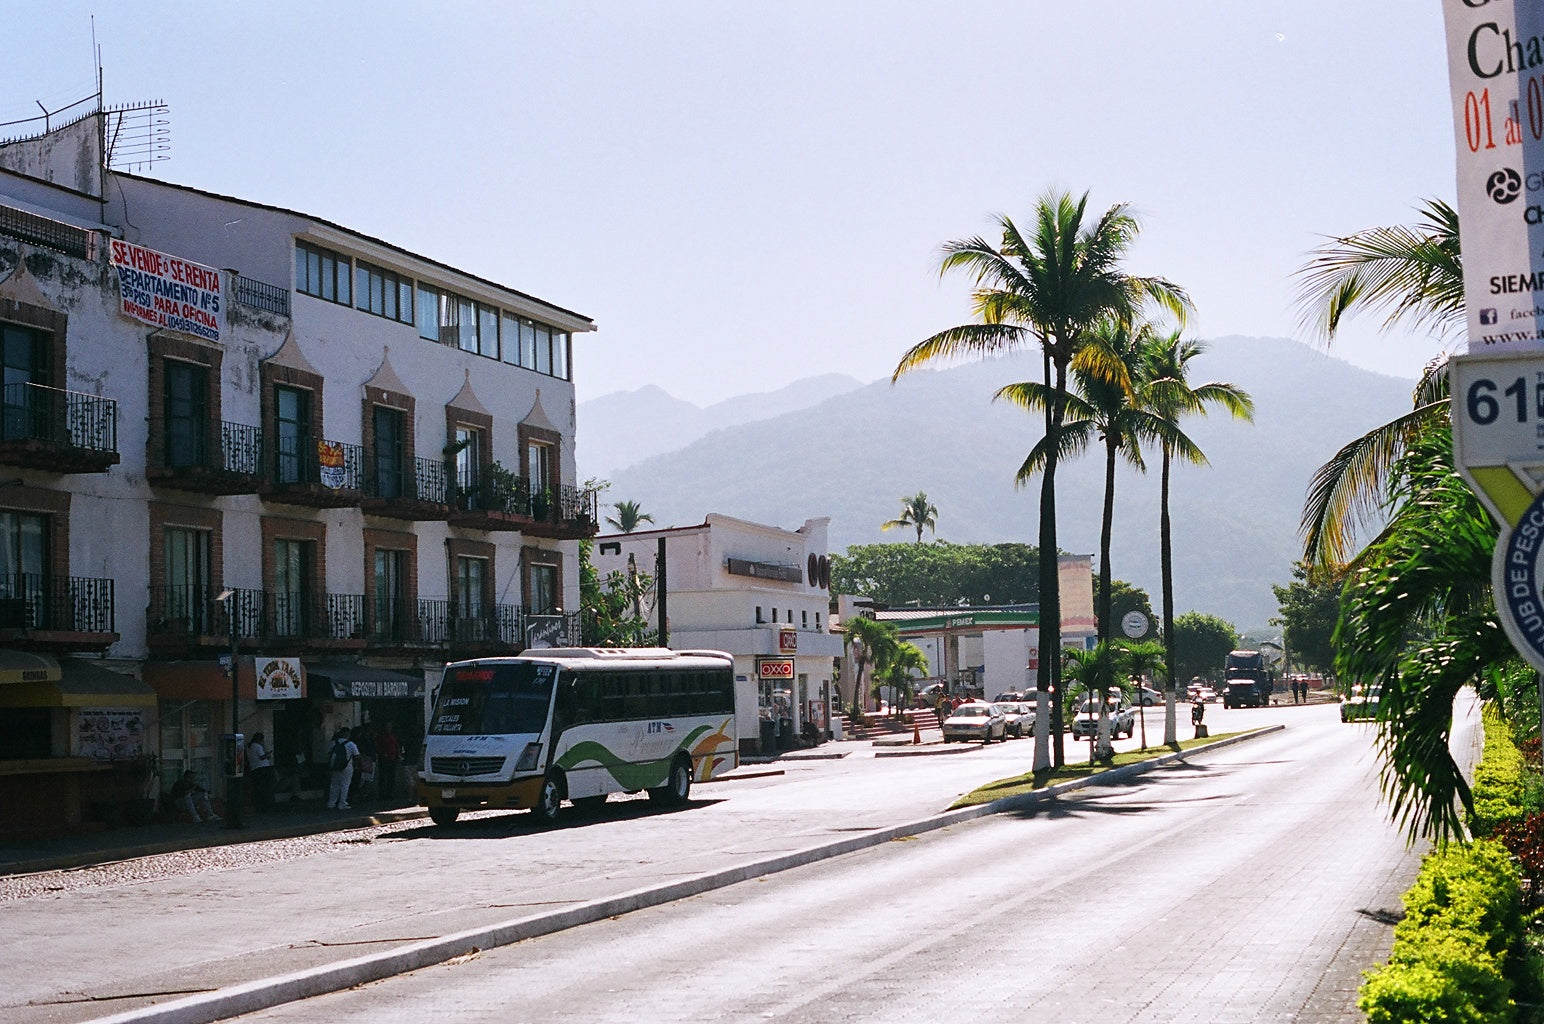 The streets and mountains of Puerto Vallarta